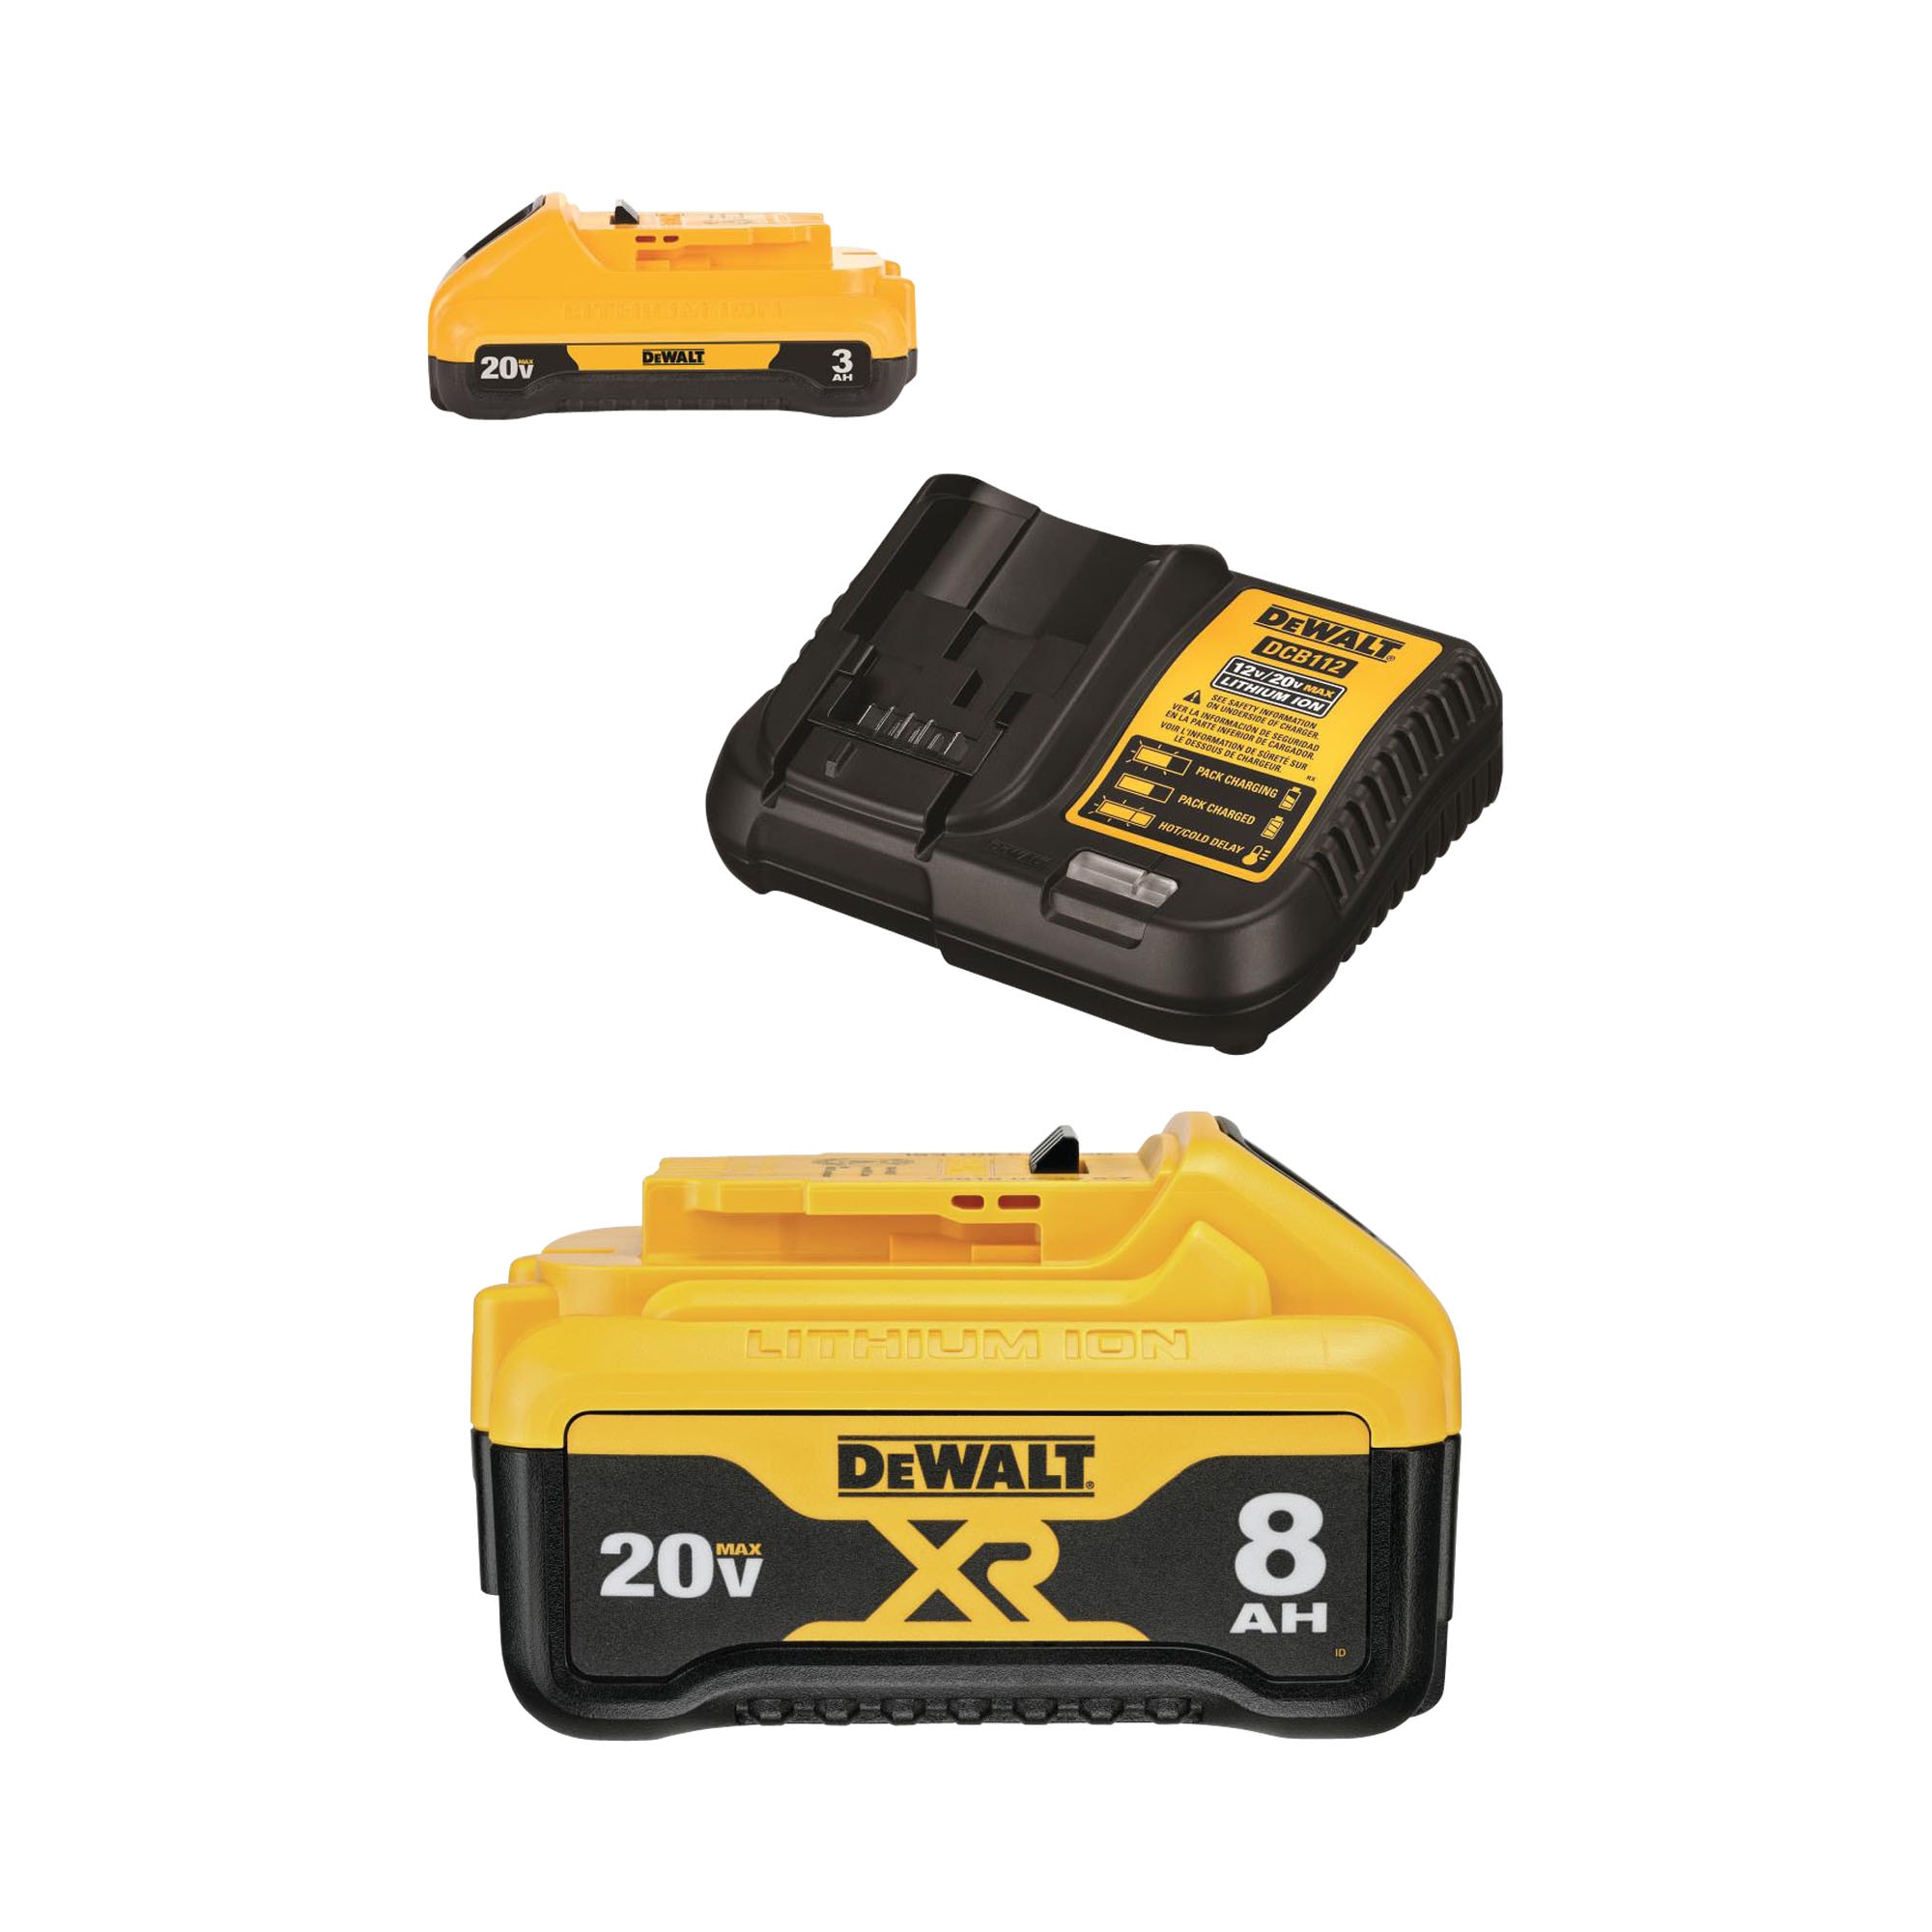 DEWALT 20-Volt Max 3 Amp-Hour Lithium Power Tool Battery Kit (Charger Included) & XR 20-Volt Max 4 Amp-Hour Lithium Power Tool Battery